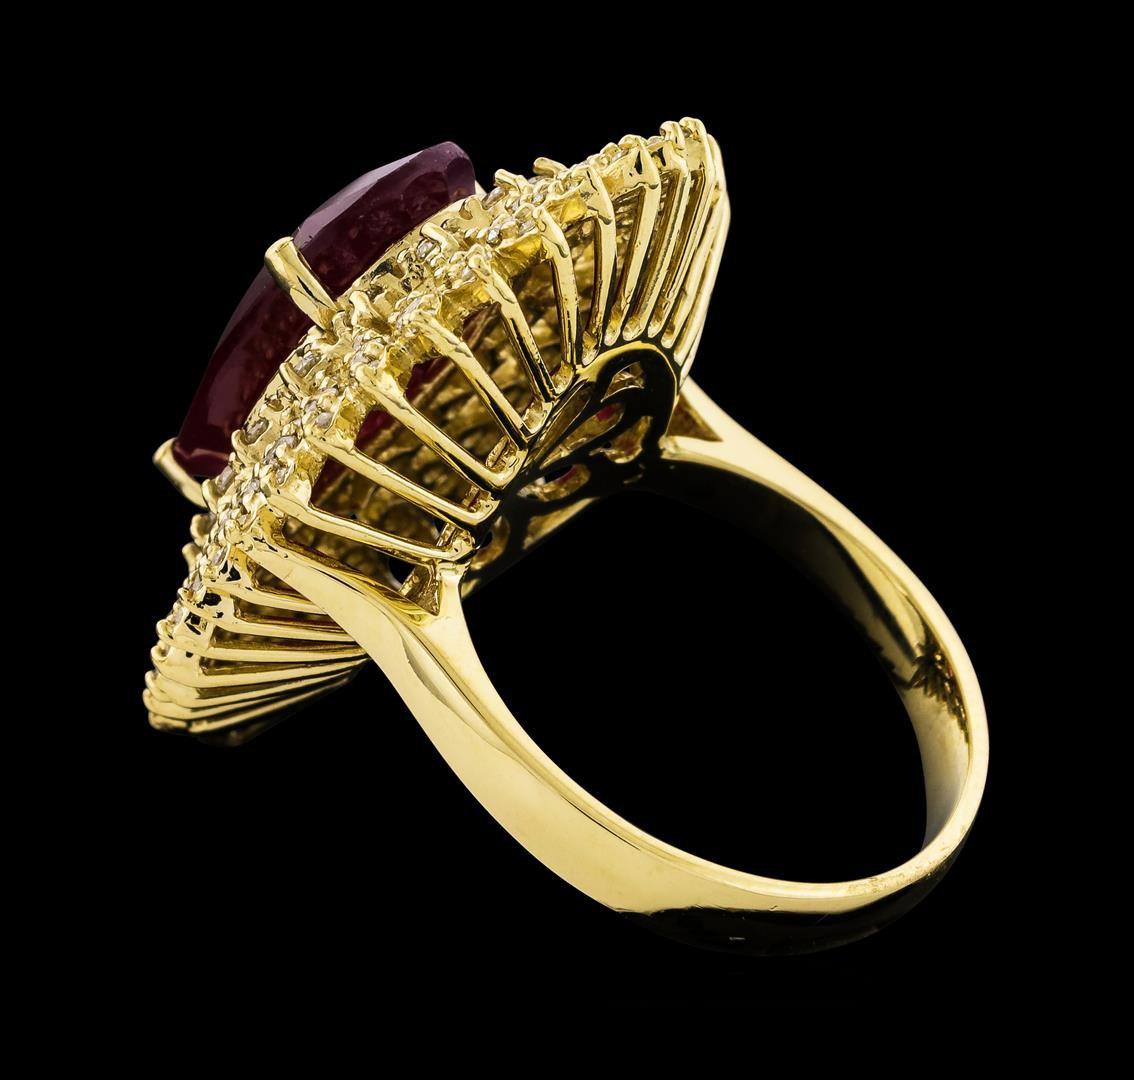 7.73 ctw Ruby and Diamond Ring - 14KT Yellow Gold